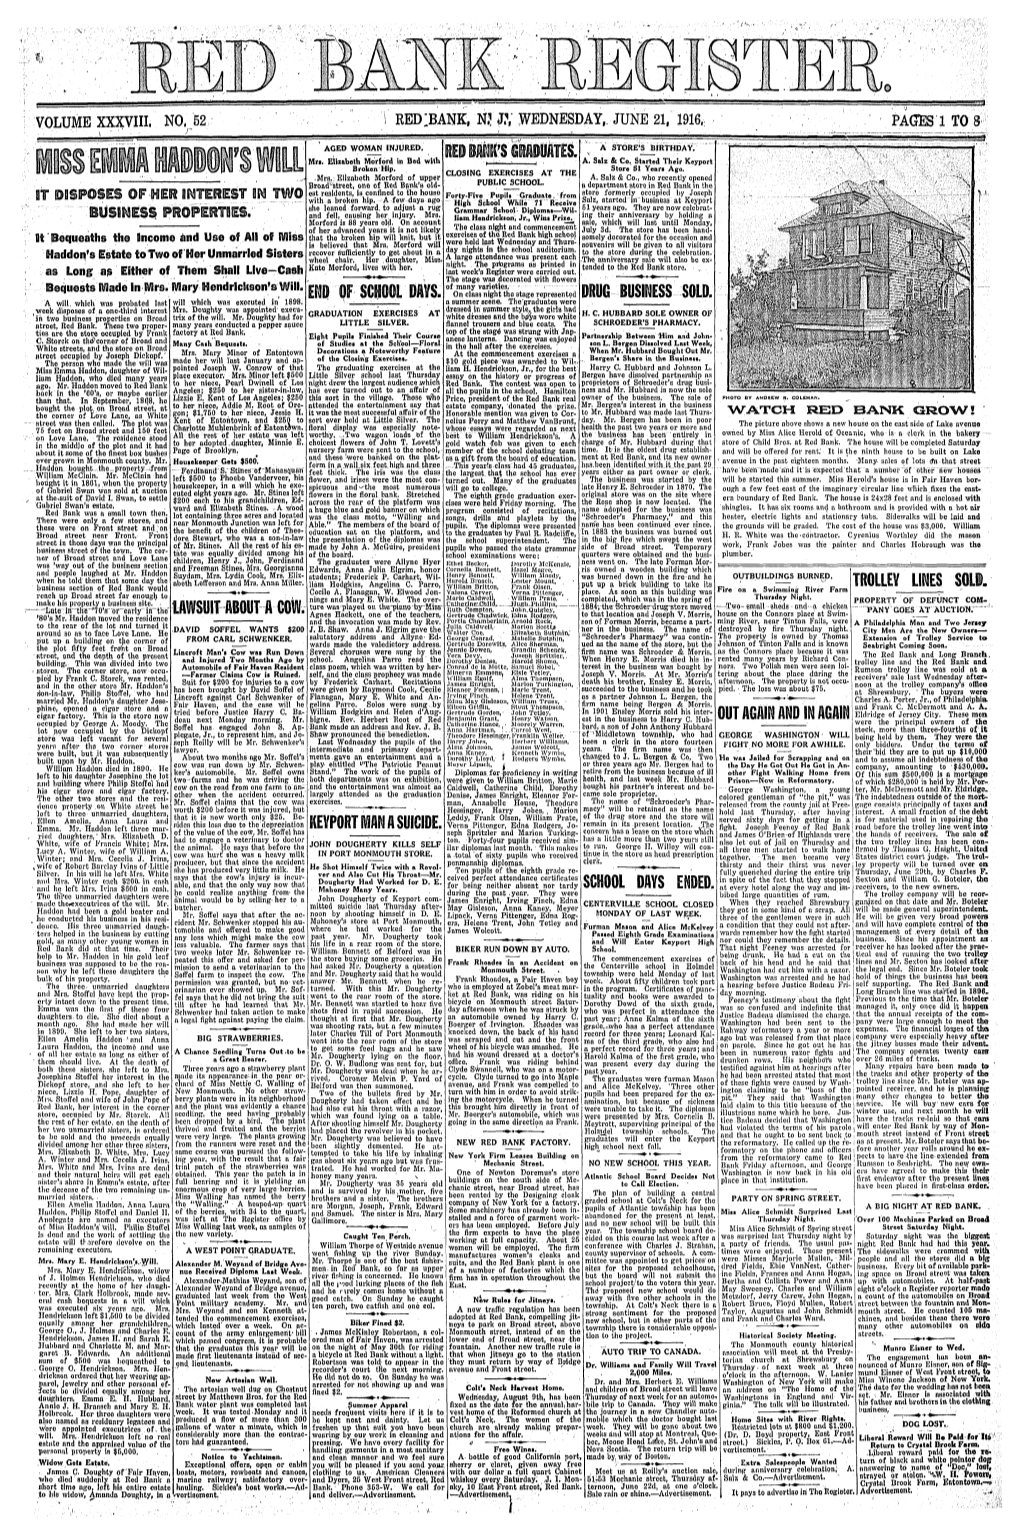 21,"'1916.: Pages! to 8